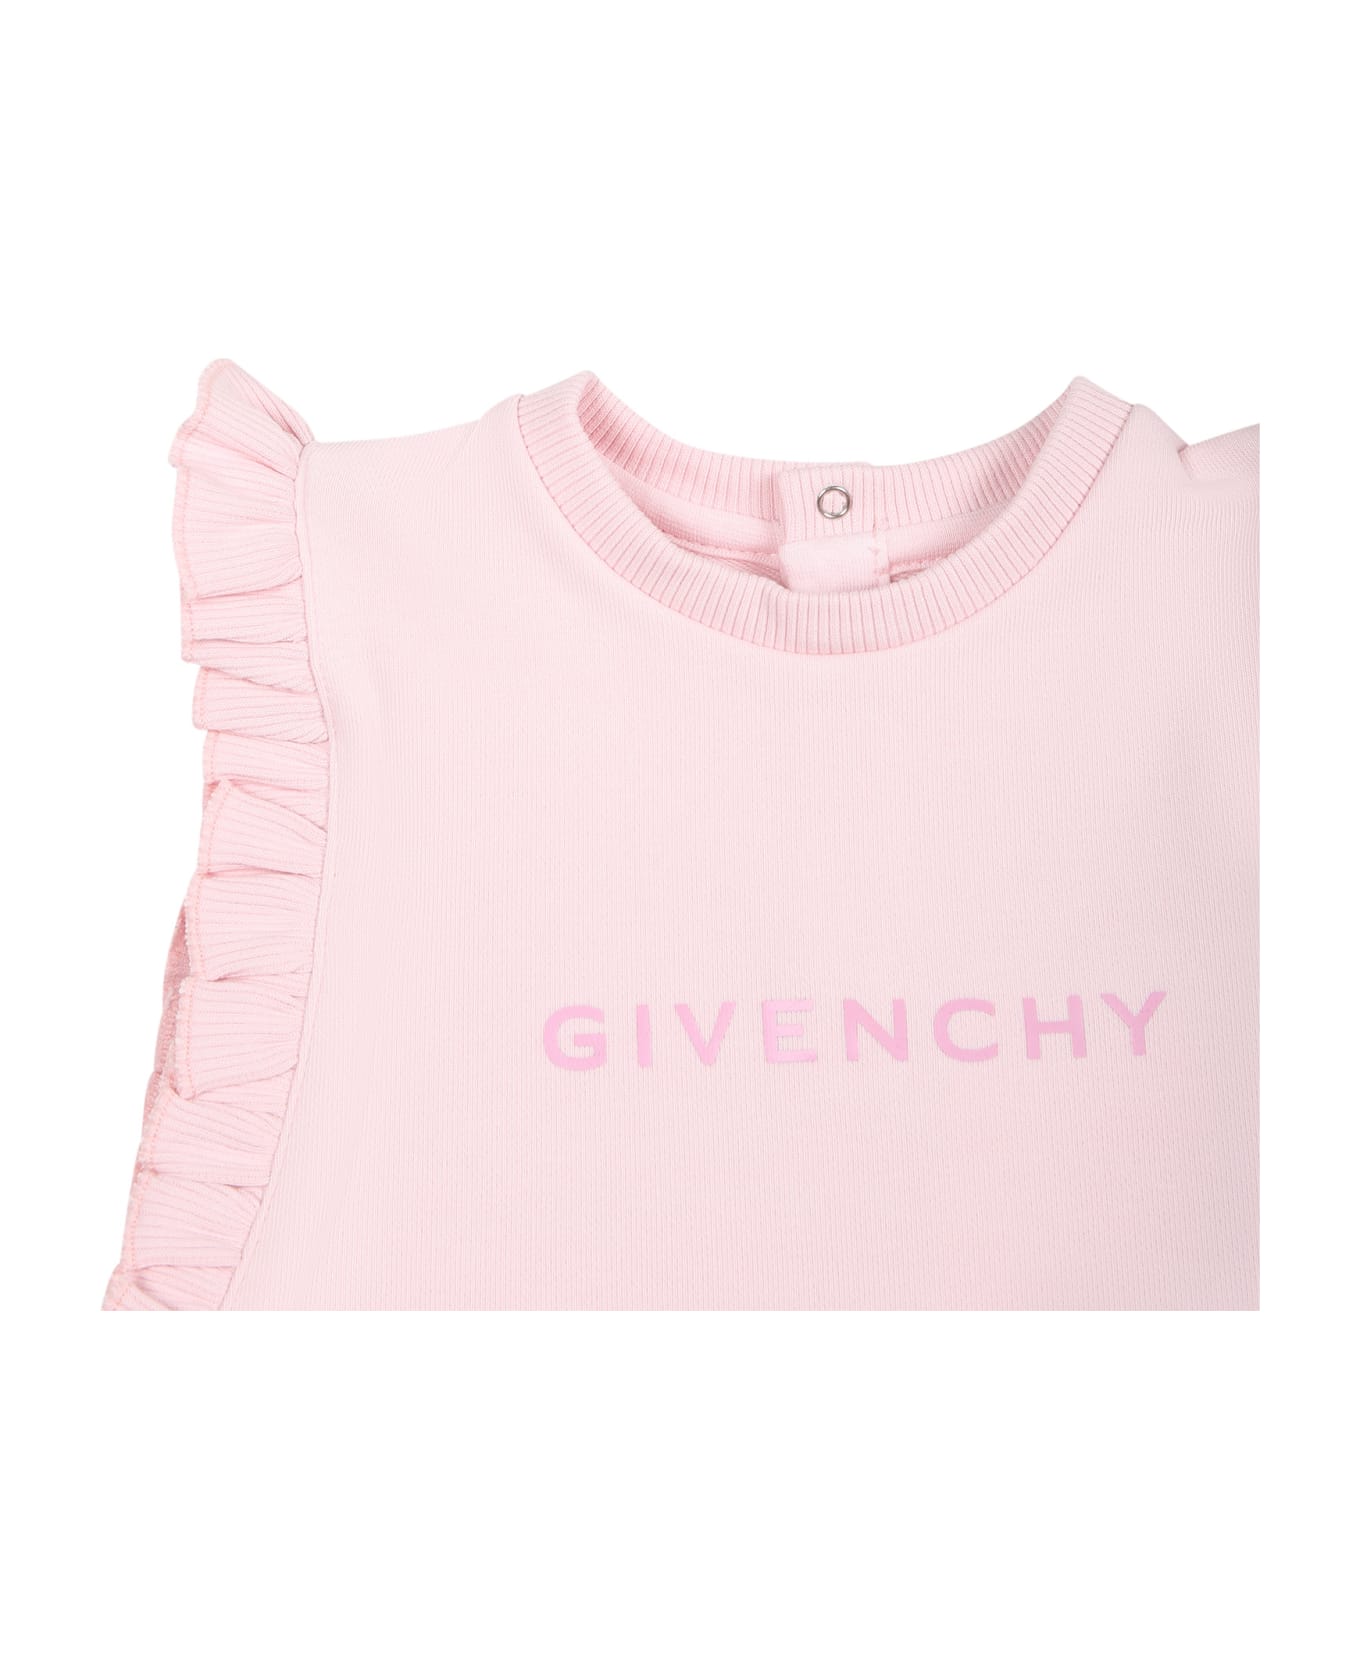 Givenchy Pink Dress For Baby Girl With Logo - Pink ウェア